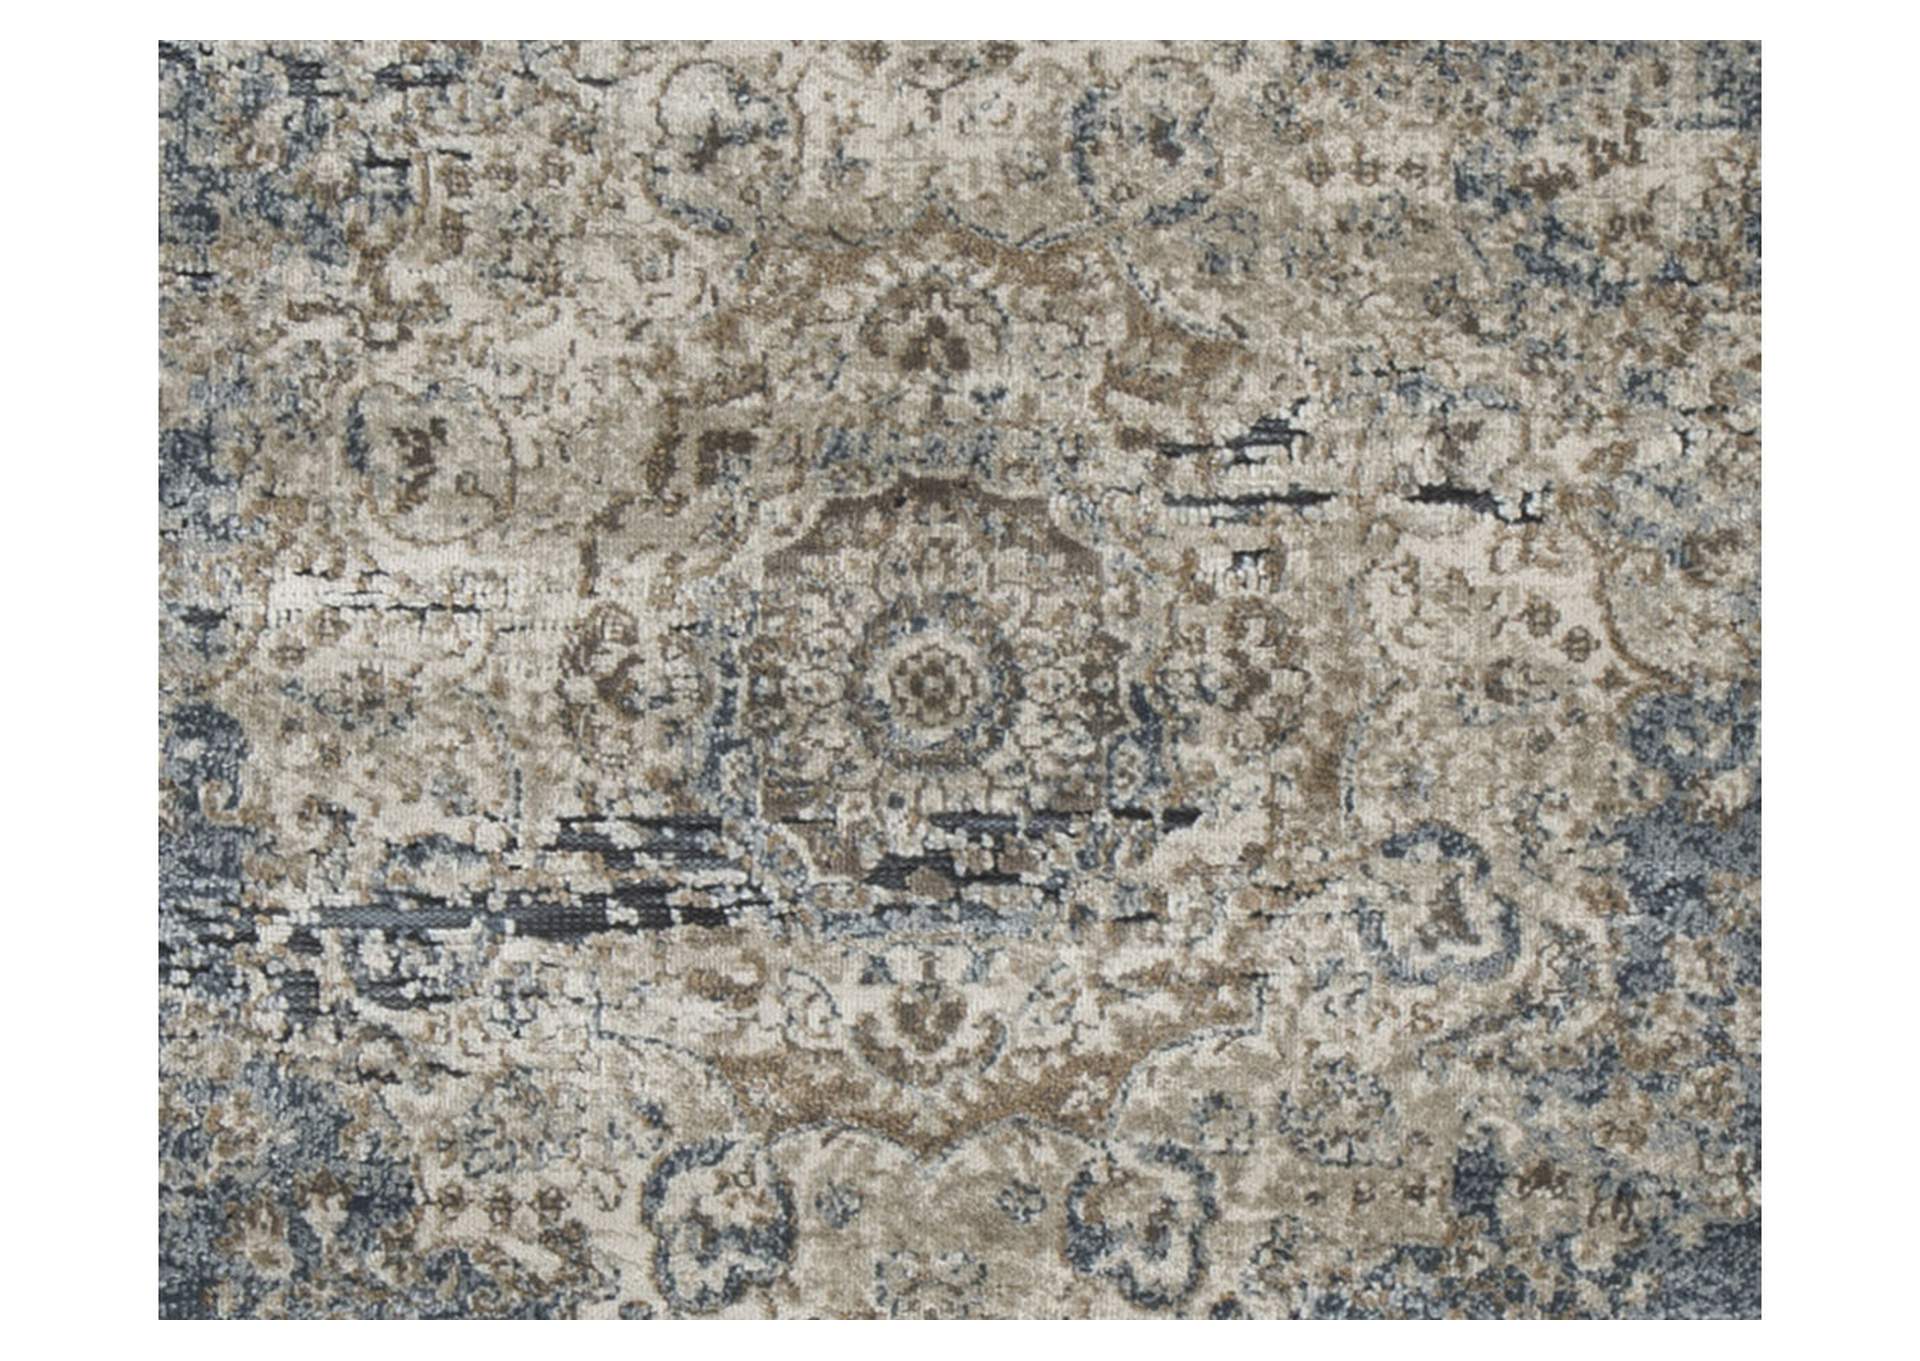 South 5\' x 7\' Rug,Direct To Consumer Express